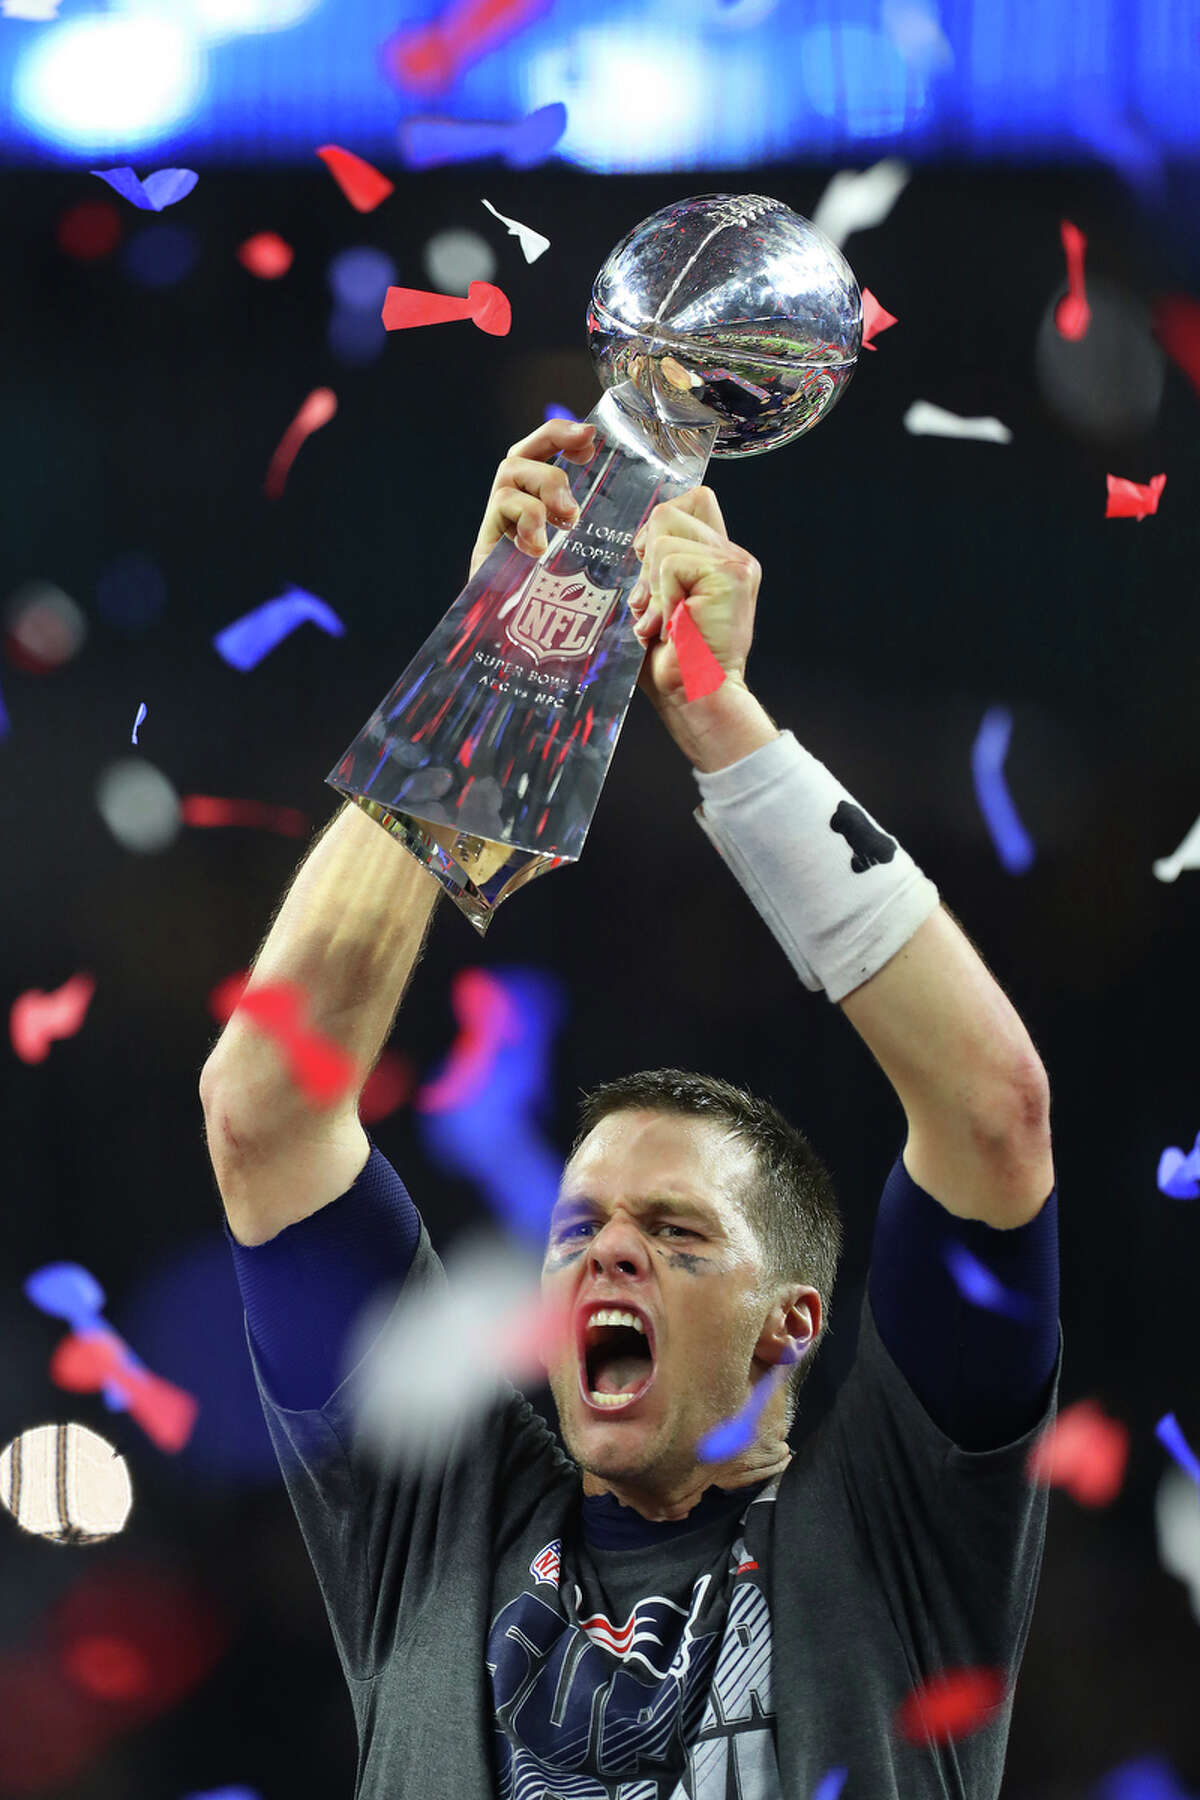 New England Patriots quarterback Tom Brady hoist the Lombadi Trophy in the air after the Patriots defeated the Atlanta Falcons in Super Bowl LI at NRG Stadium on Sunday, Feb. 5, 2017, in Houston. ( Brett Coomer / Houston Chronicle )